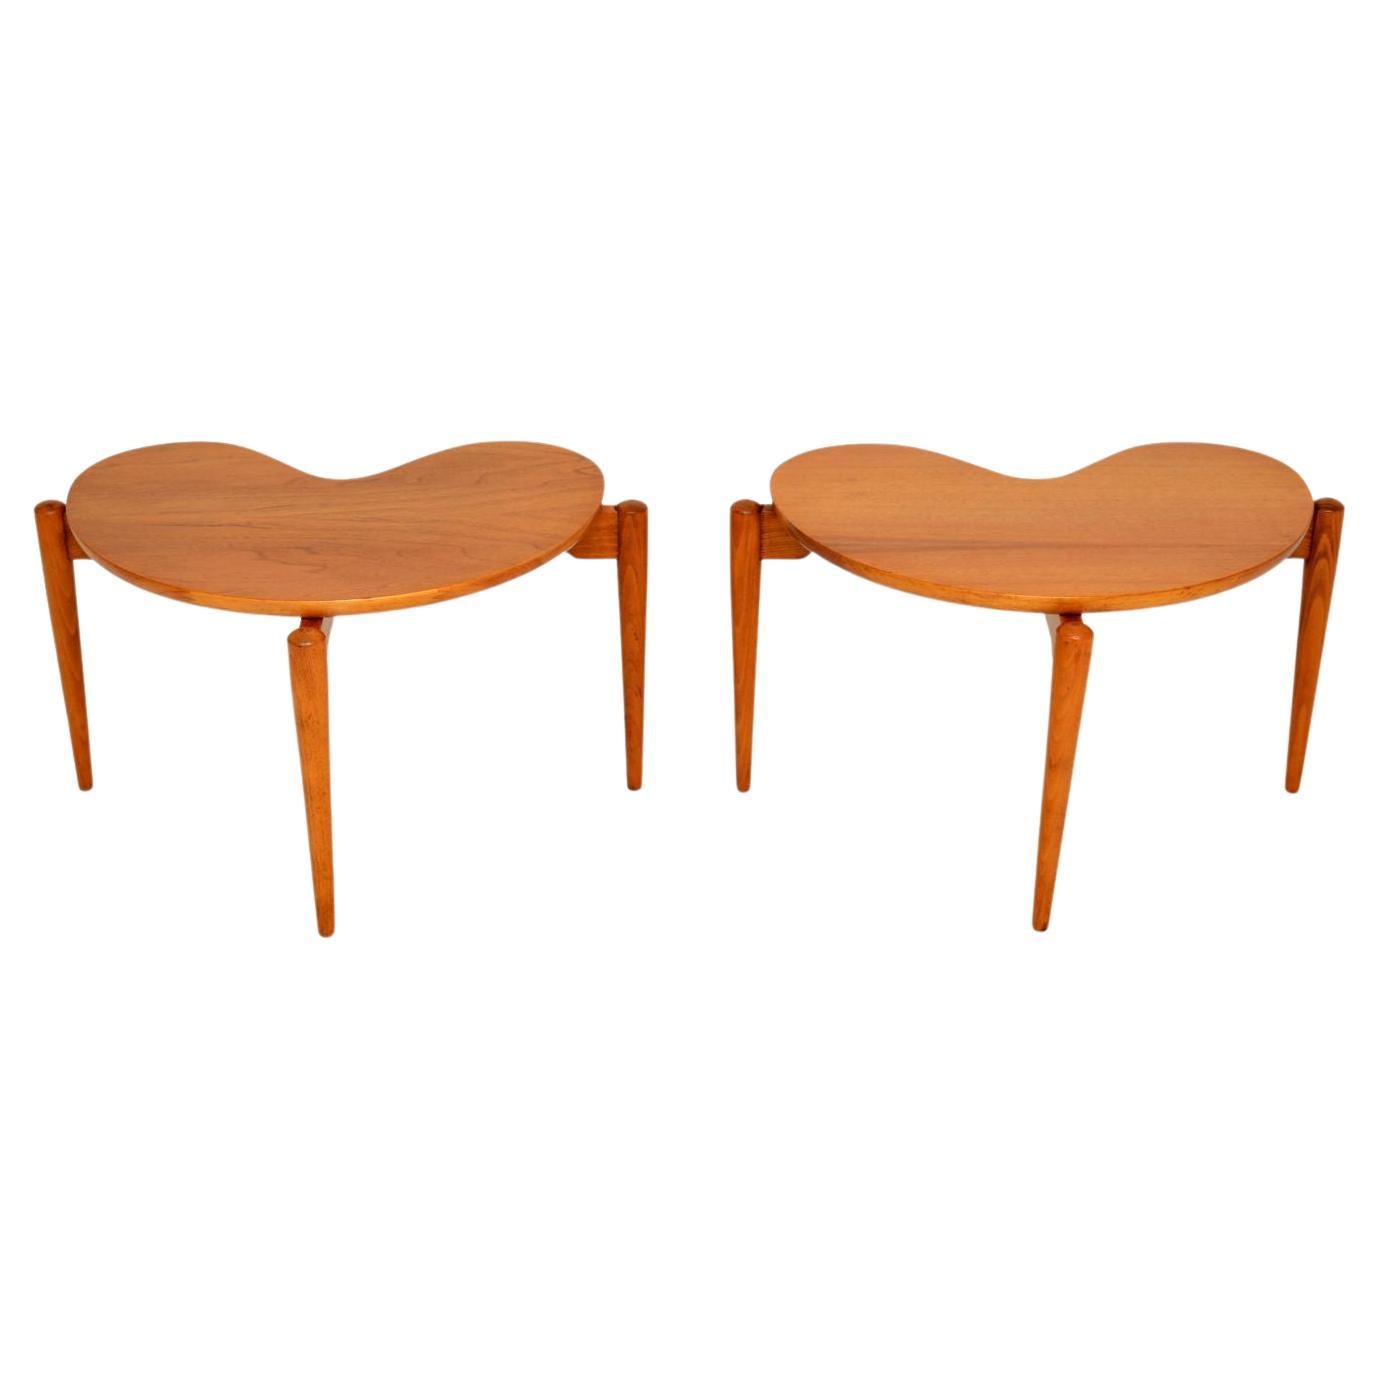 1950s Pair of Walnut Boomerang Side Tables